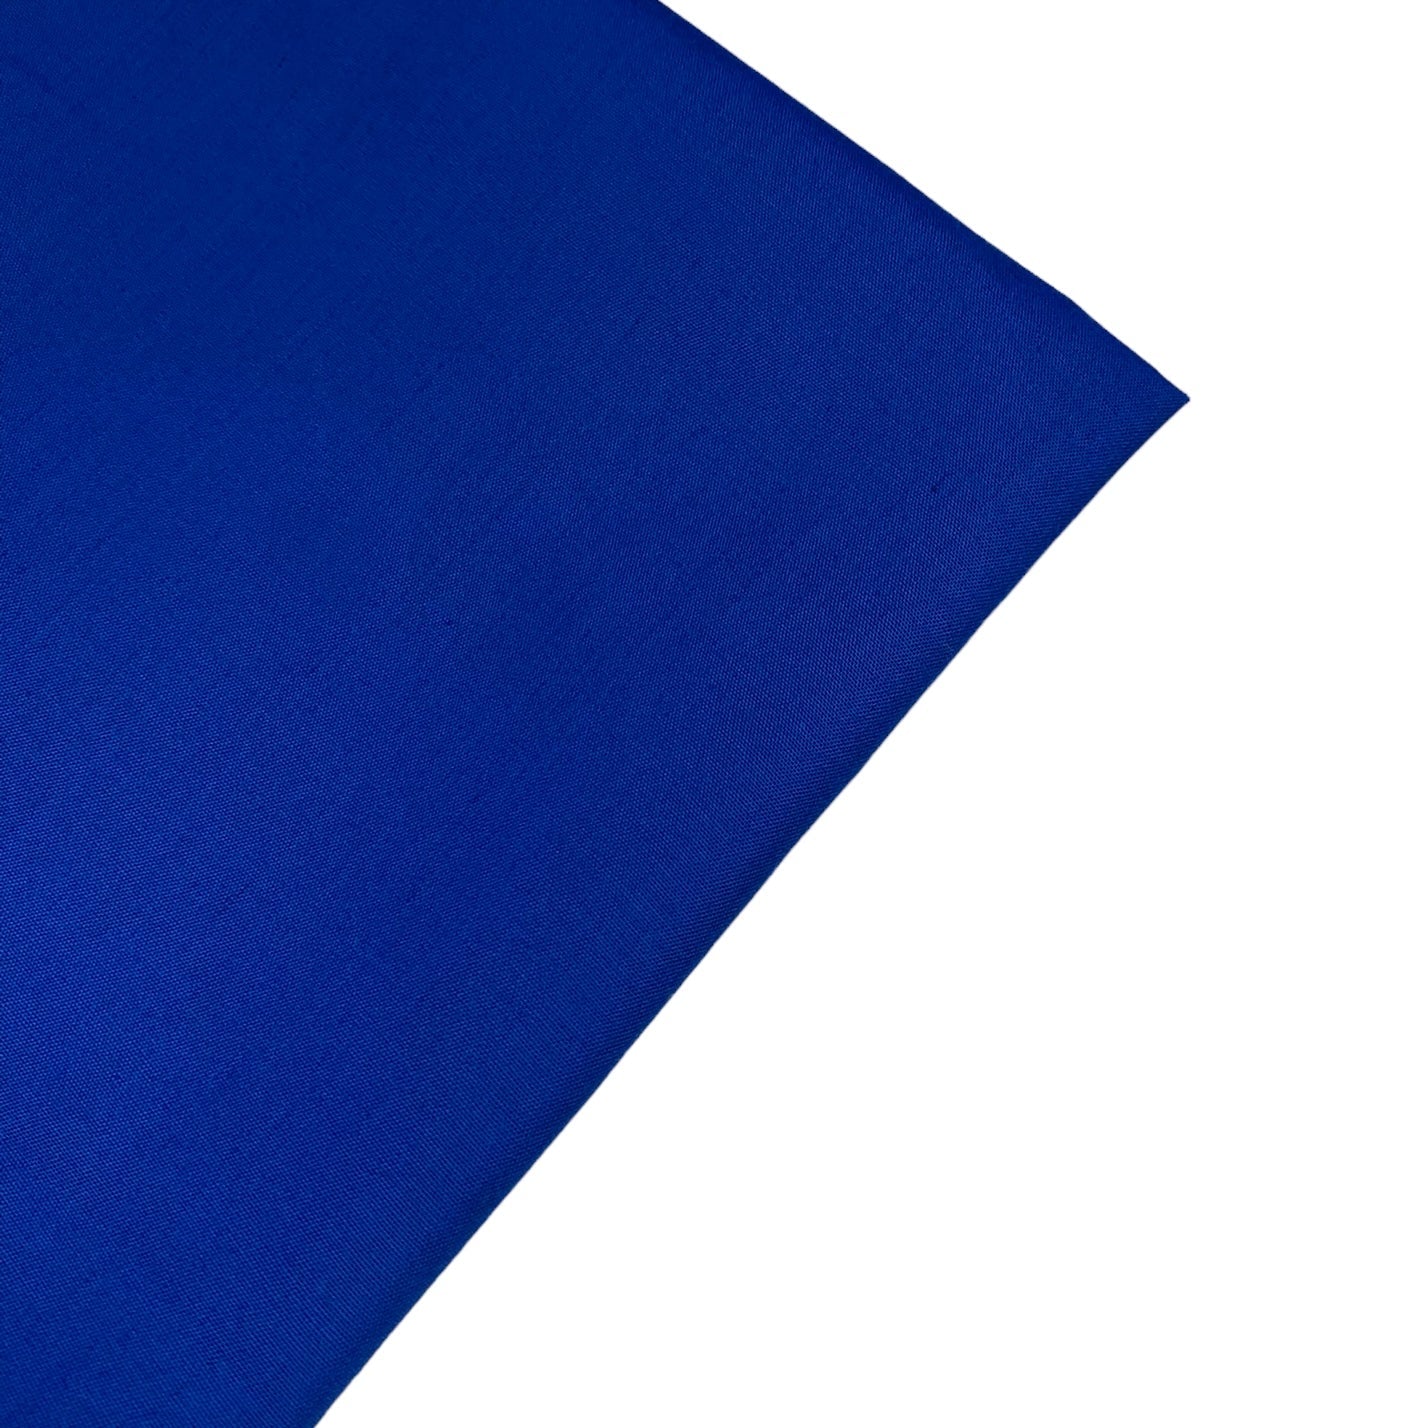 Polyester/Cotton Broadcloth - Blue Grey